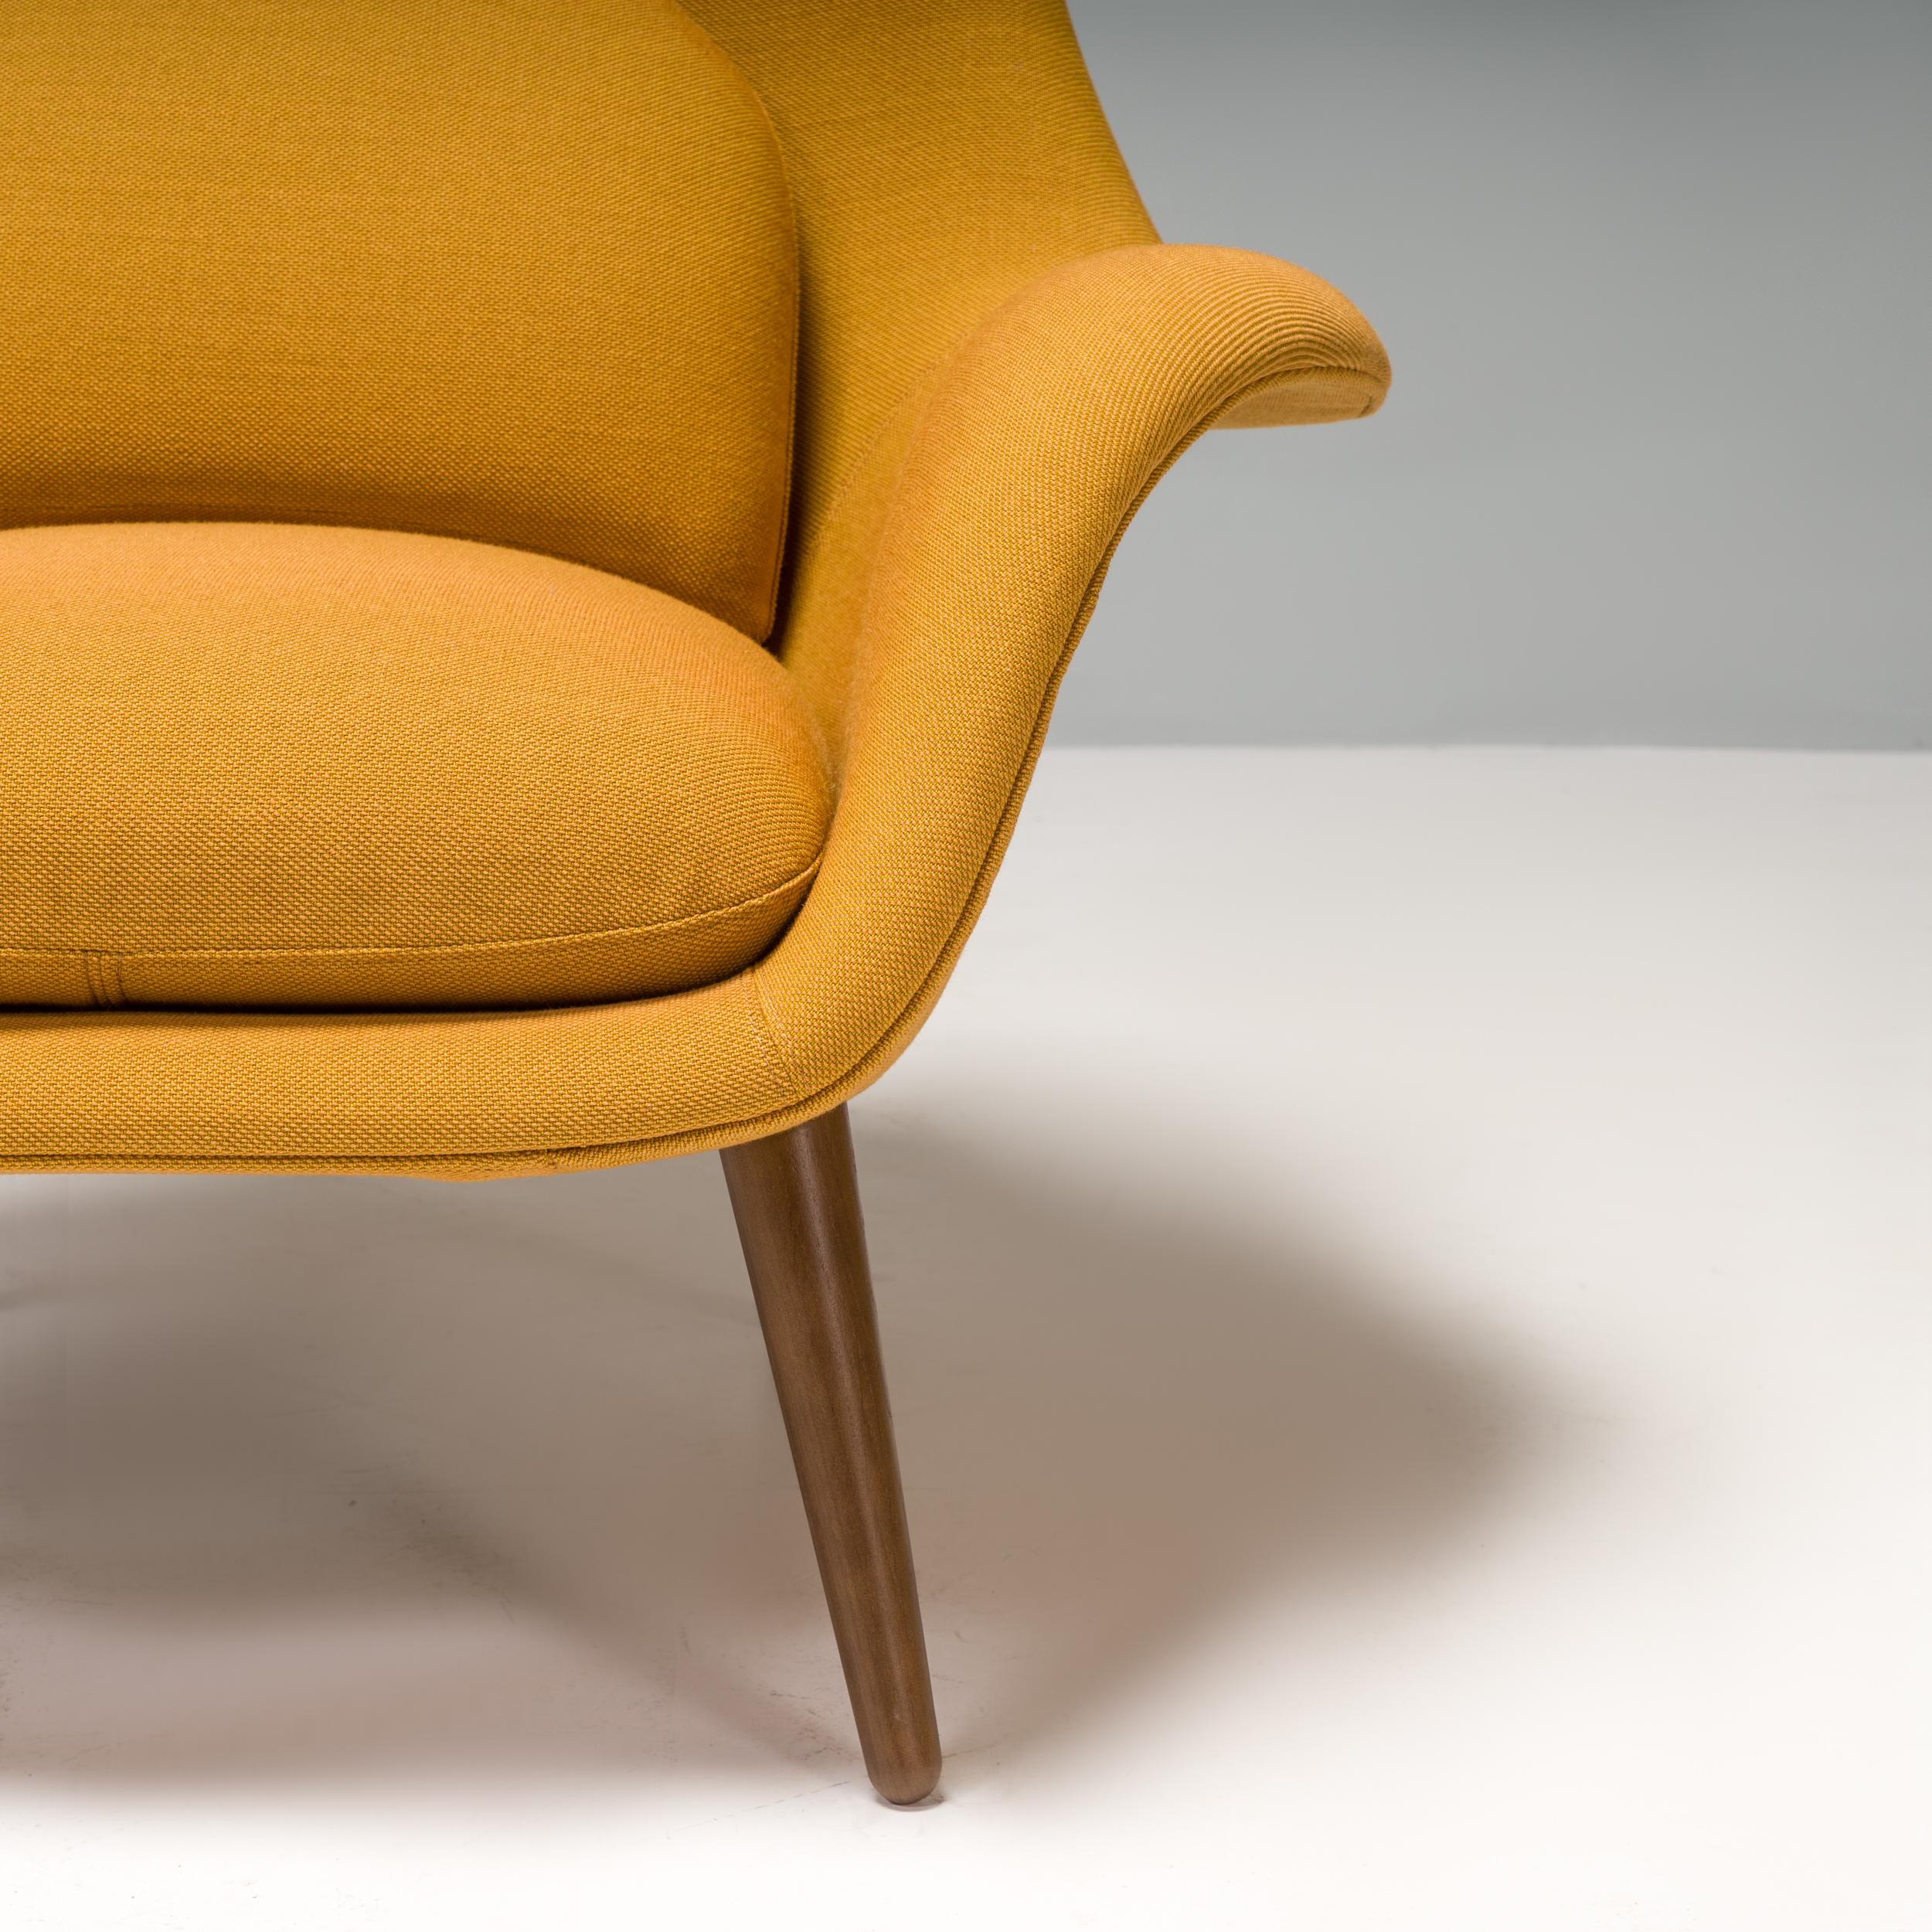 Contemporary Fredericia by Space Copenhagen Mustard Yellow Fabric Swoon Lounge Armchair, 2021